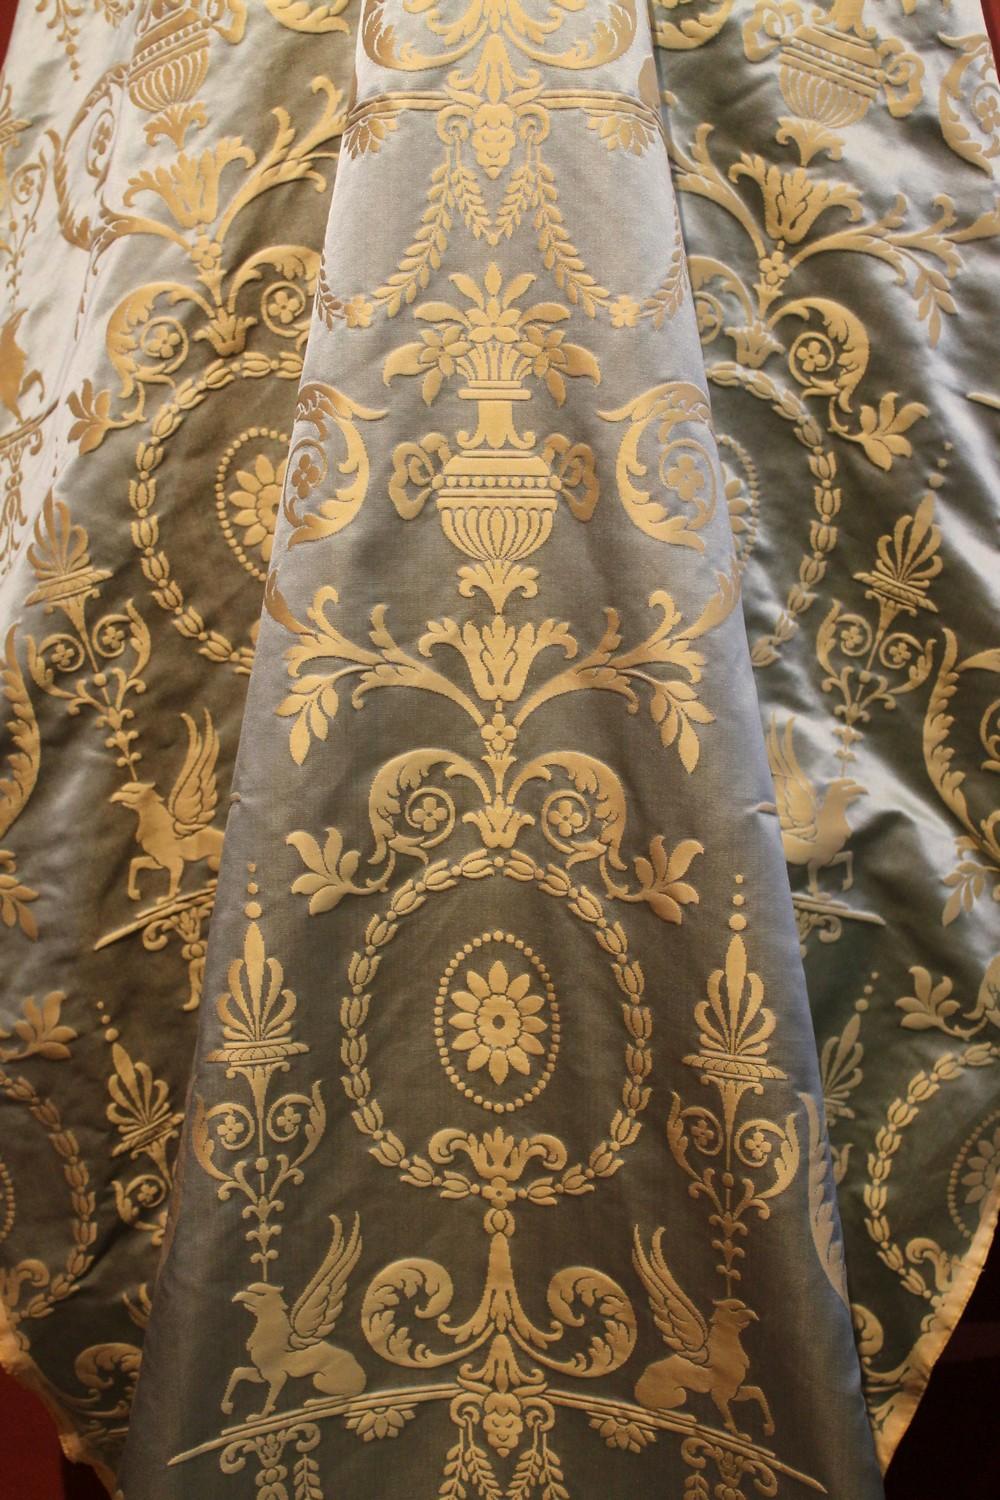 No words or photos can describe the extreme quality of this 100% silk Italian fabric damask and its fantastic color-shifting effect, the iridescent background's color ranging from light blue to dusty blue enhances the cream-golden color’s